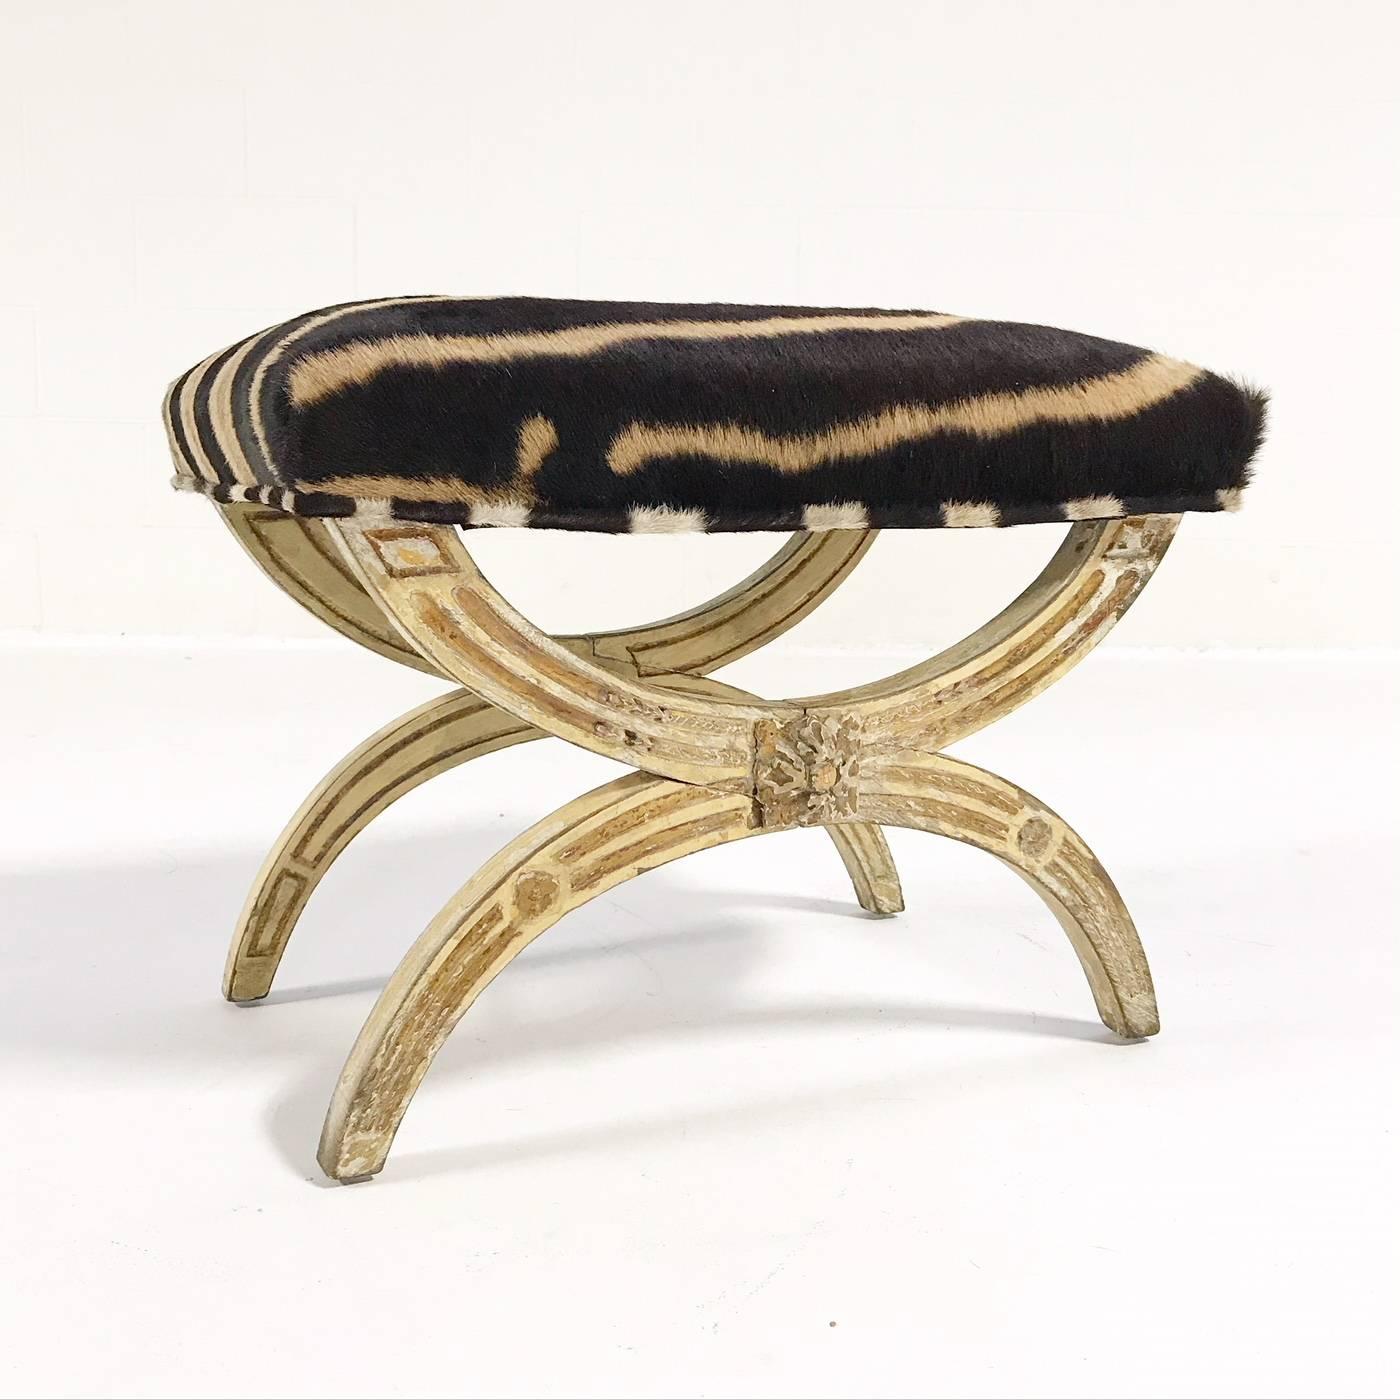 A prime example of a 19th century Regency painted stool. Having a rectangular cushion seat restored and reupholstered in zebra hide, raised on fluted X-form supports and joined by a stretcher. So fancy. So chic.

Measures: 24in W x 17in D x 18.5in